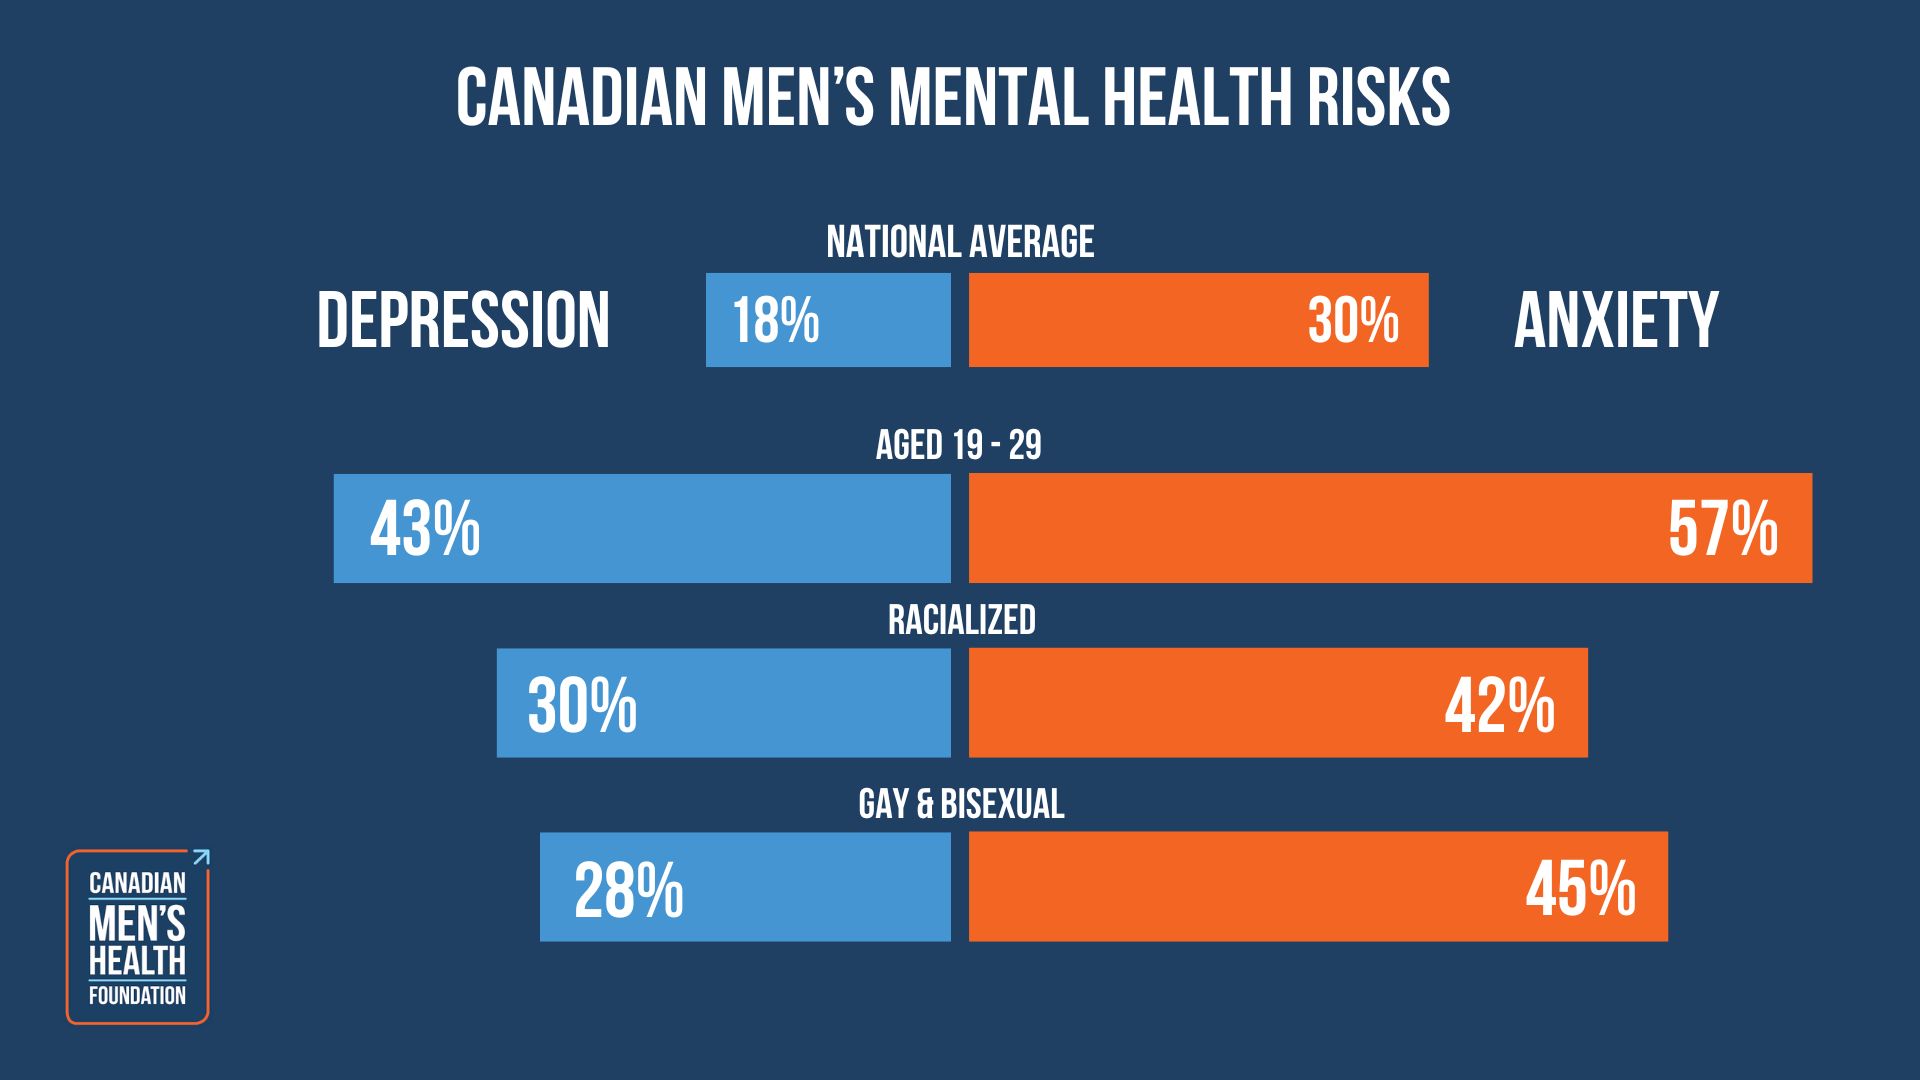 Infographic highlighting increased risk of depression and anxiety among young men, gay or bisexual, and racialized Canadian men.